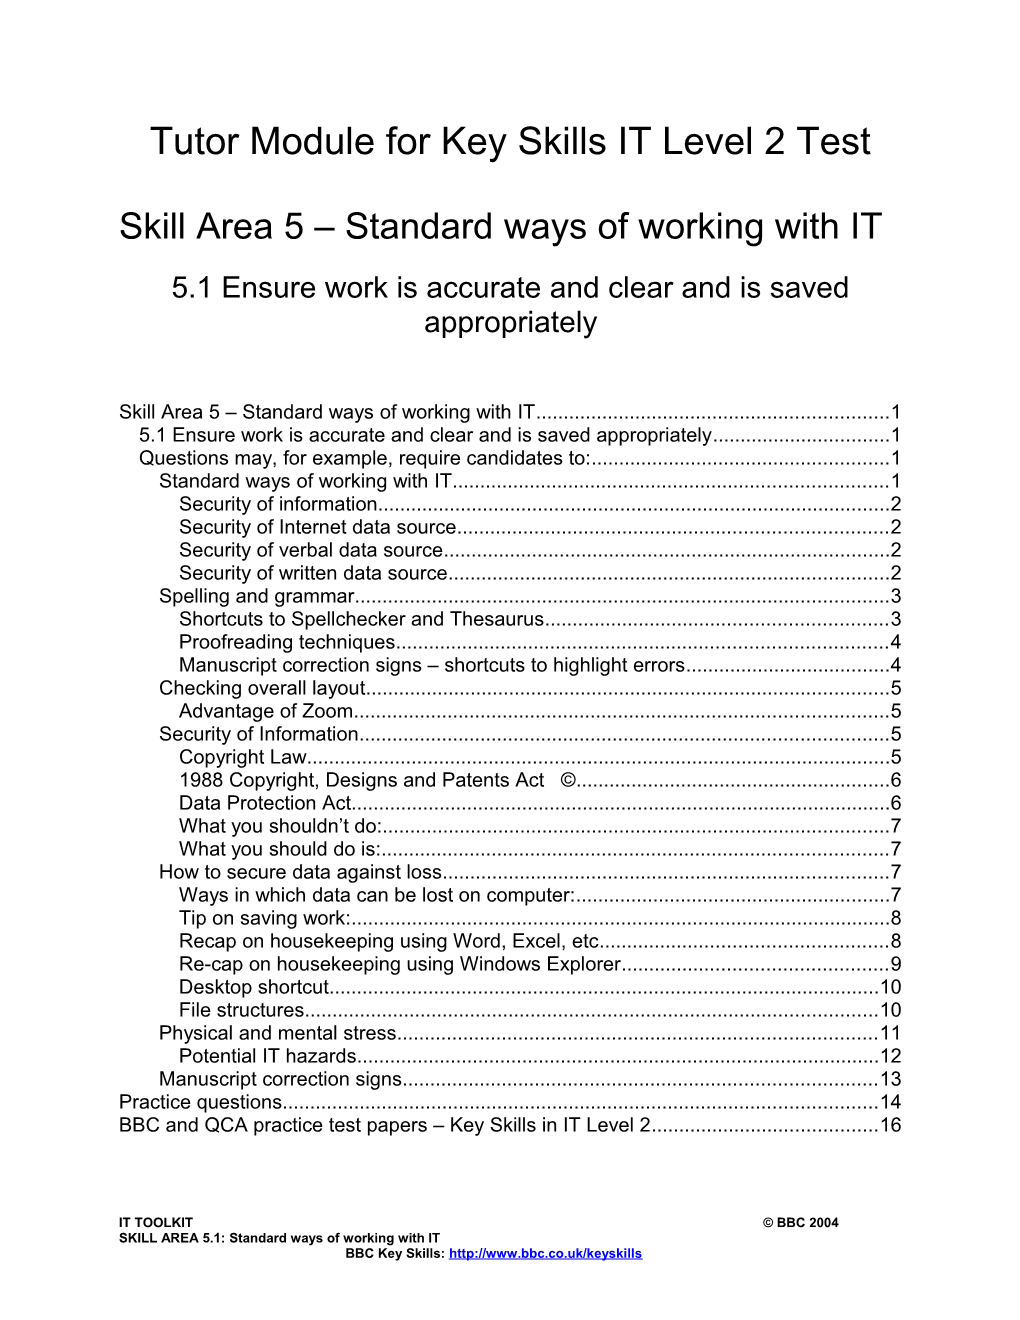 Topic Area 5 – Standard Ways Of Working With IT